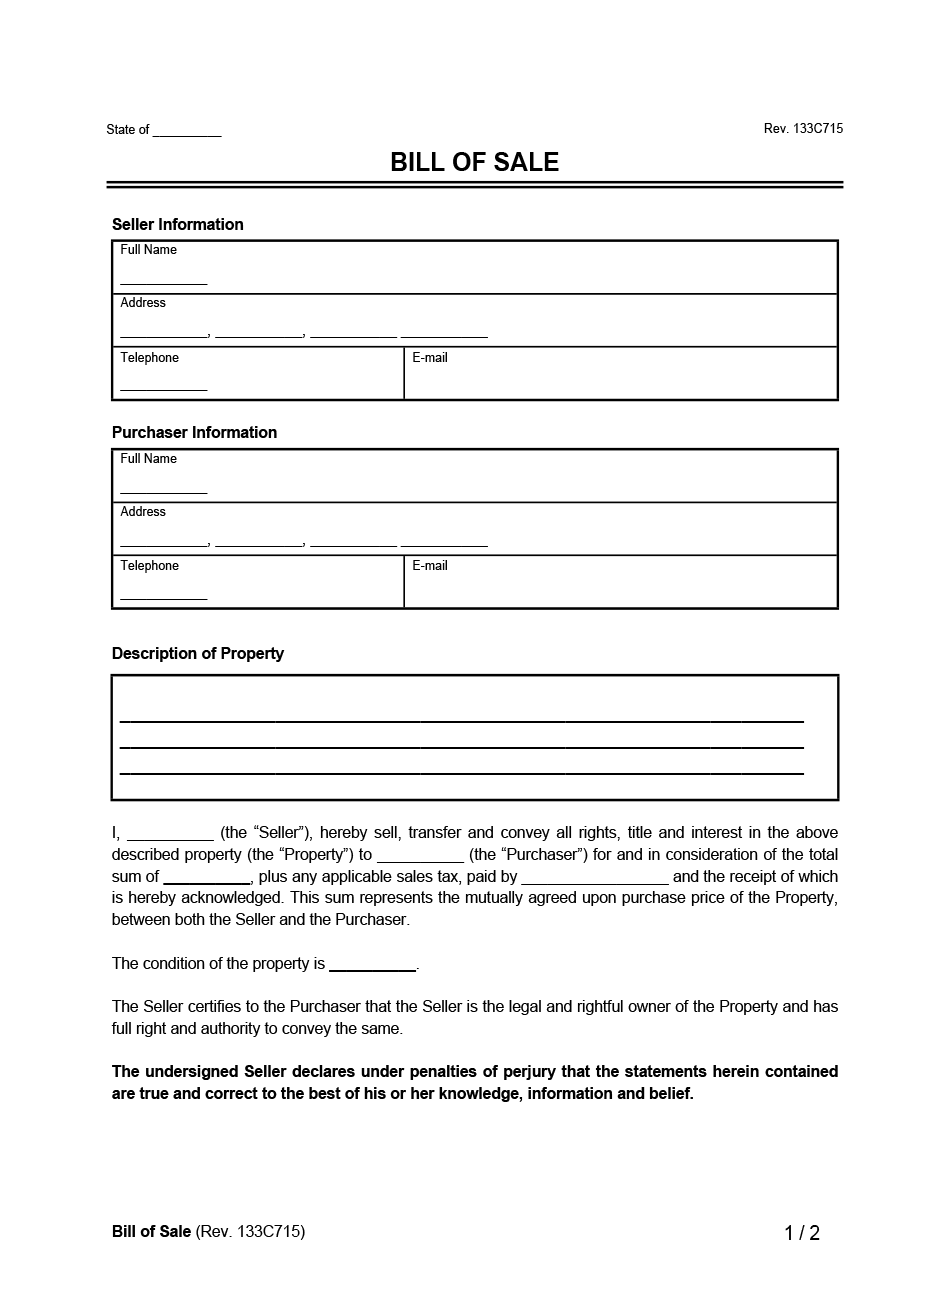 Bill of Sale Example Form